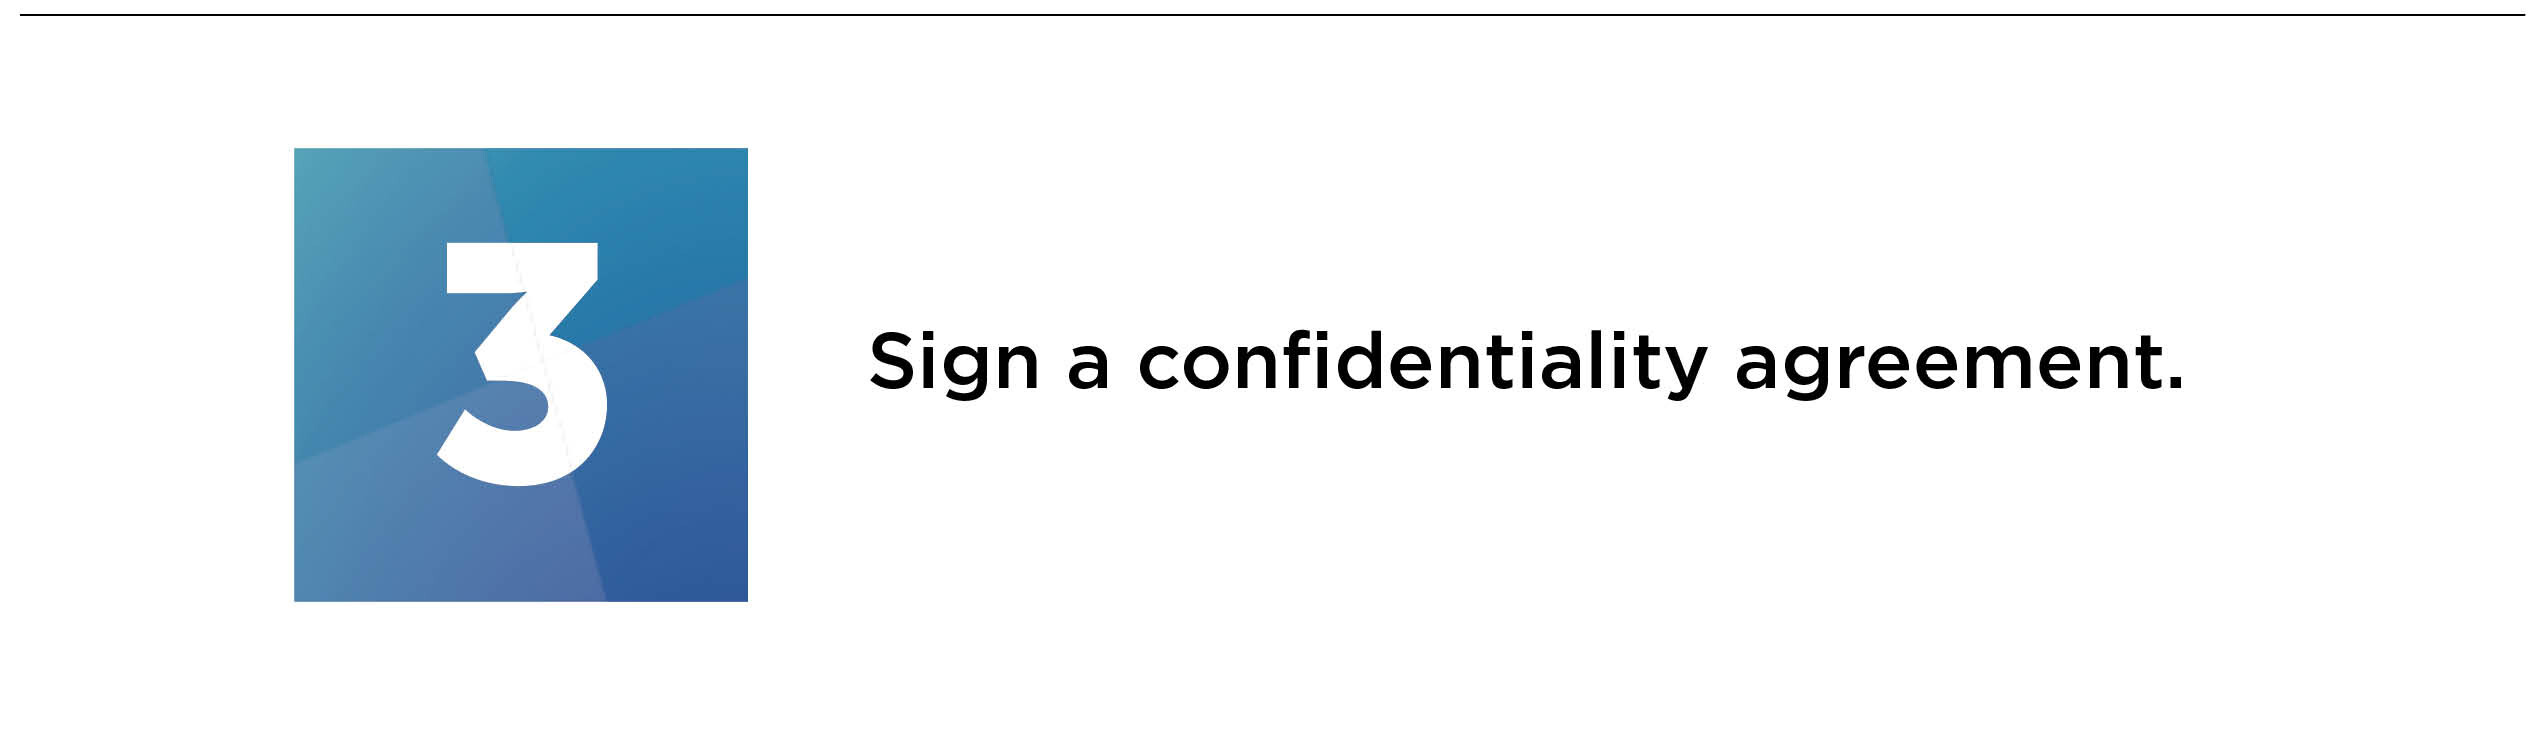 sign a confidentiality agreement